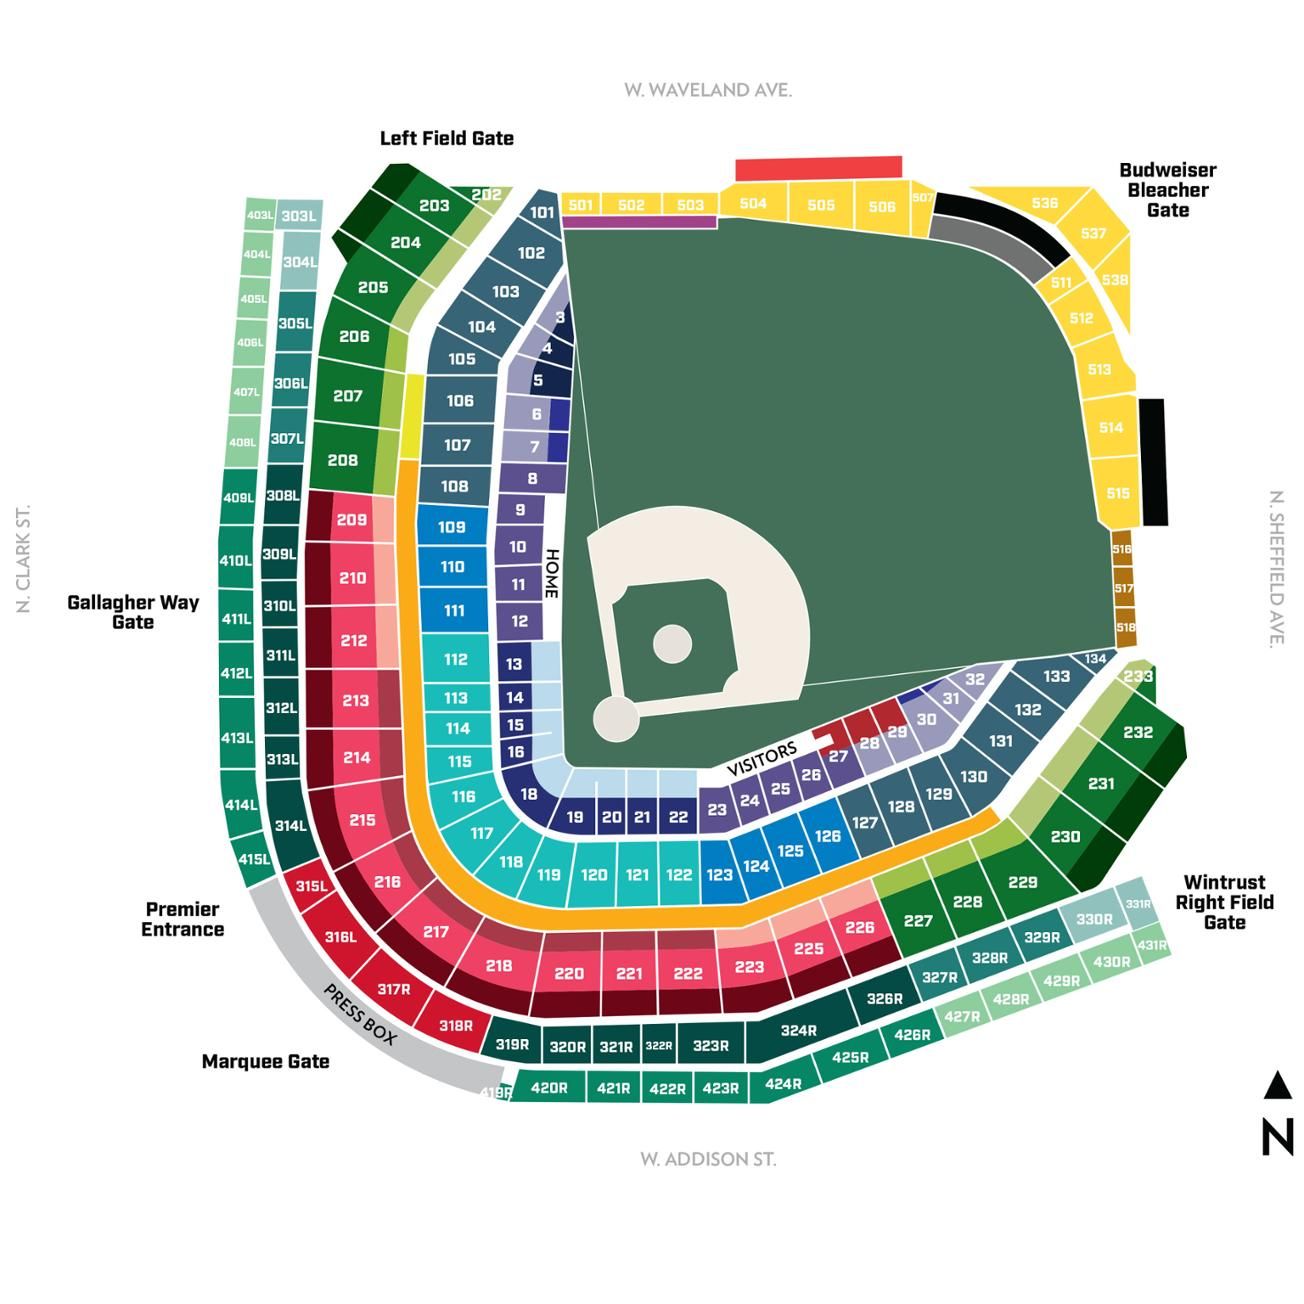 Wrigley Field Seating Chart, Views and Reviews | Chicago Cubs